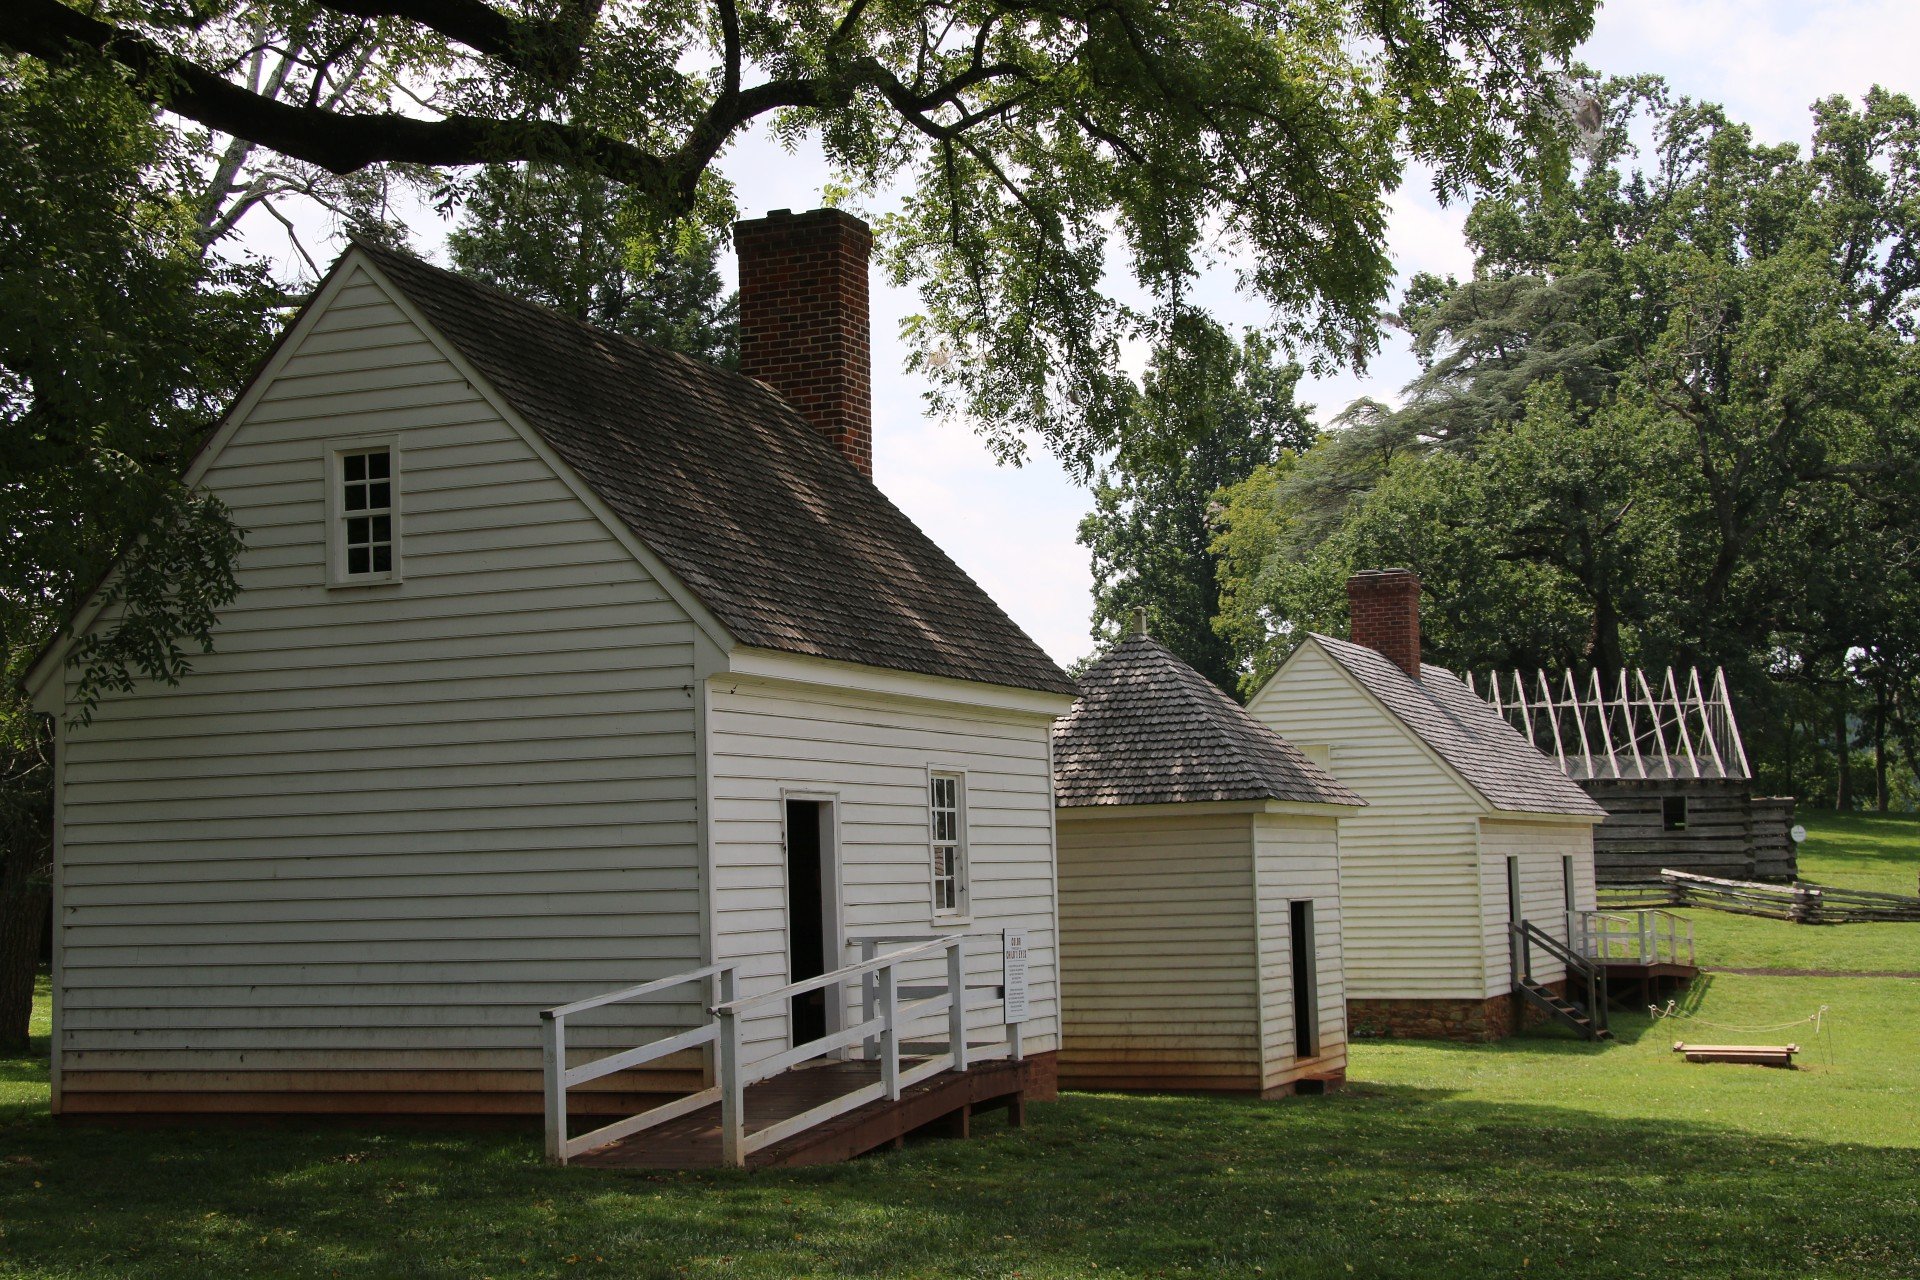  The South Yard was the dwelling place of many of the Montpelier’s domestic laborers, and now features reconstructed buildings to reflect the conditions in which they lived. (Photo Credit: Andra Landi) 